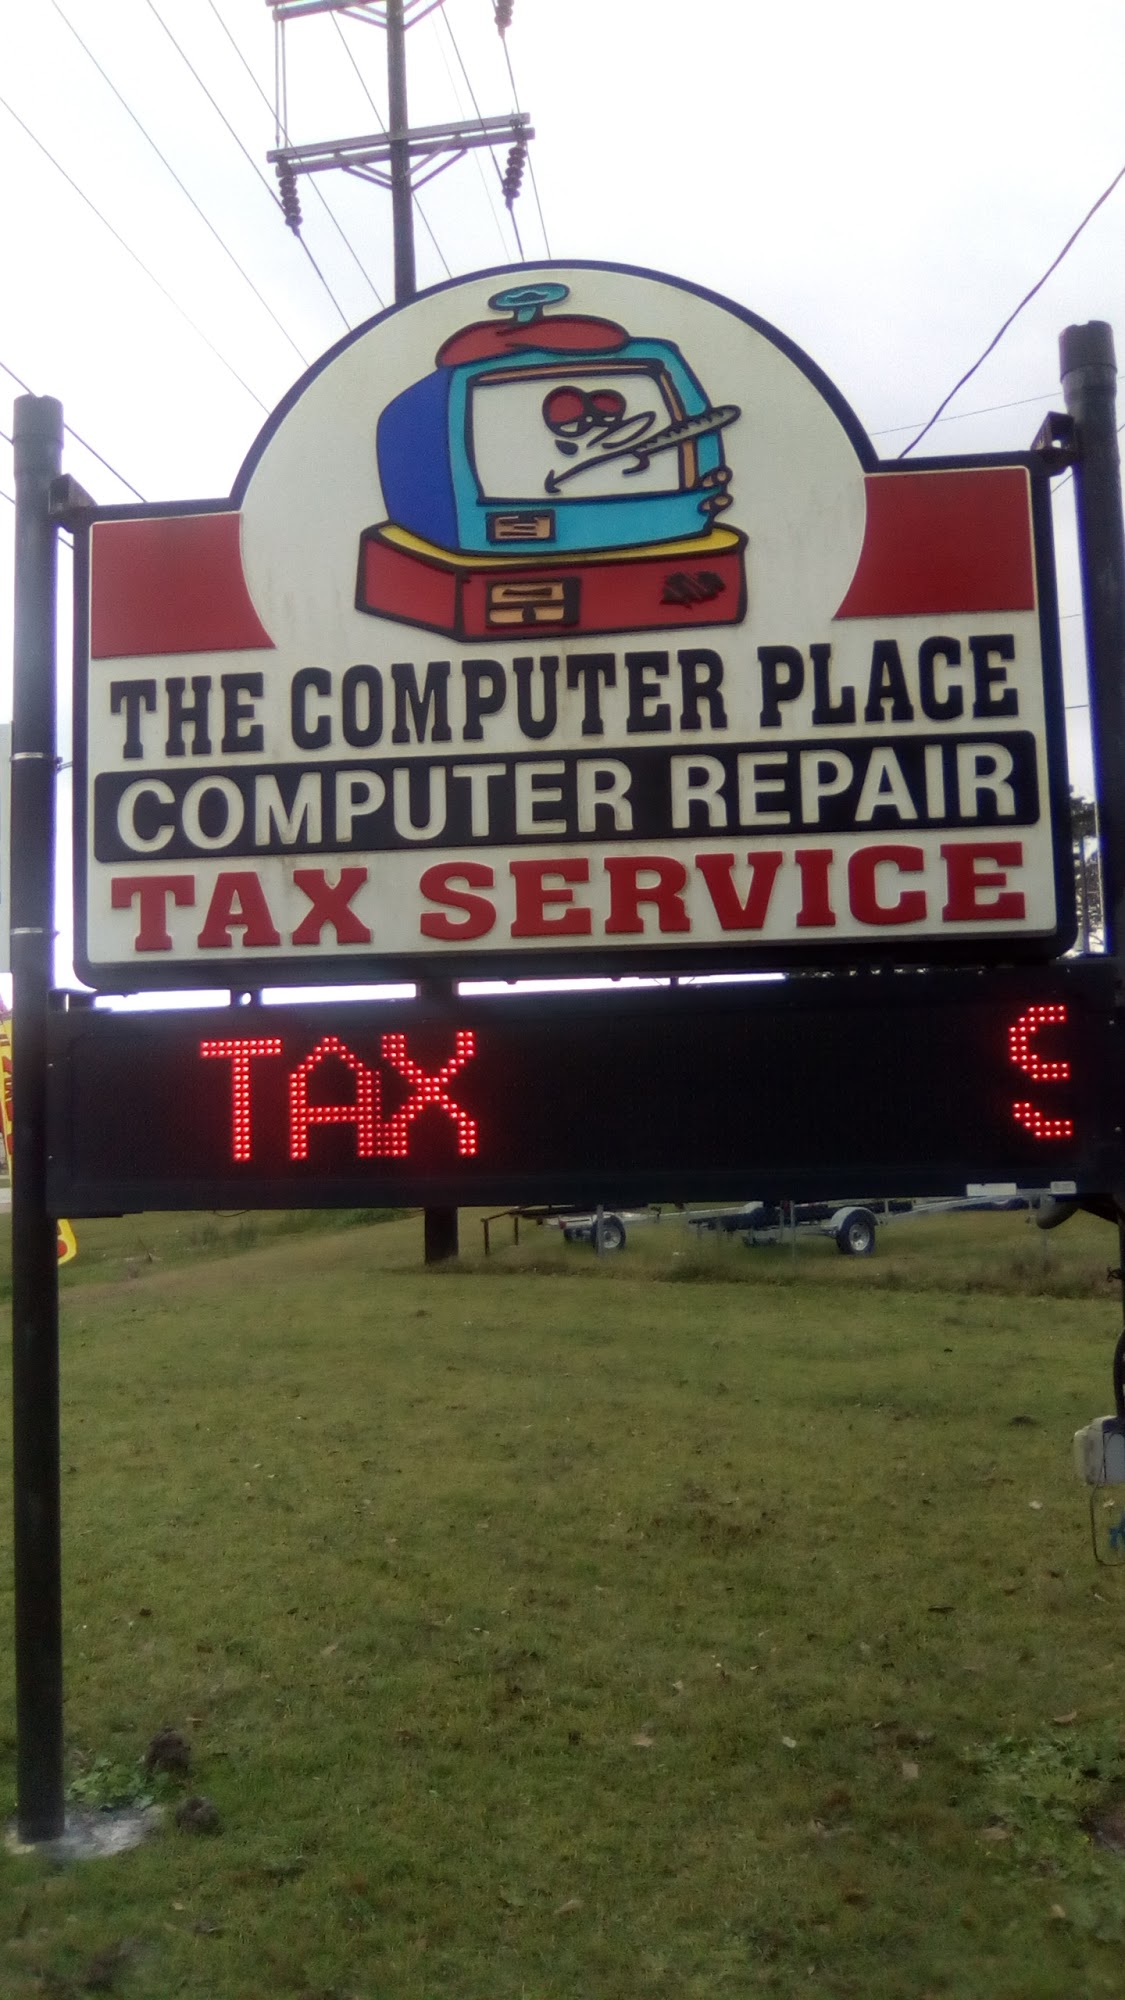 The Computer Place